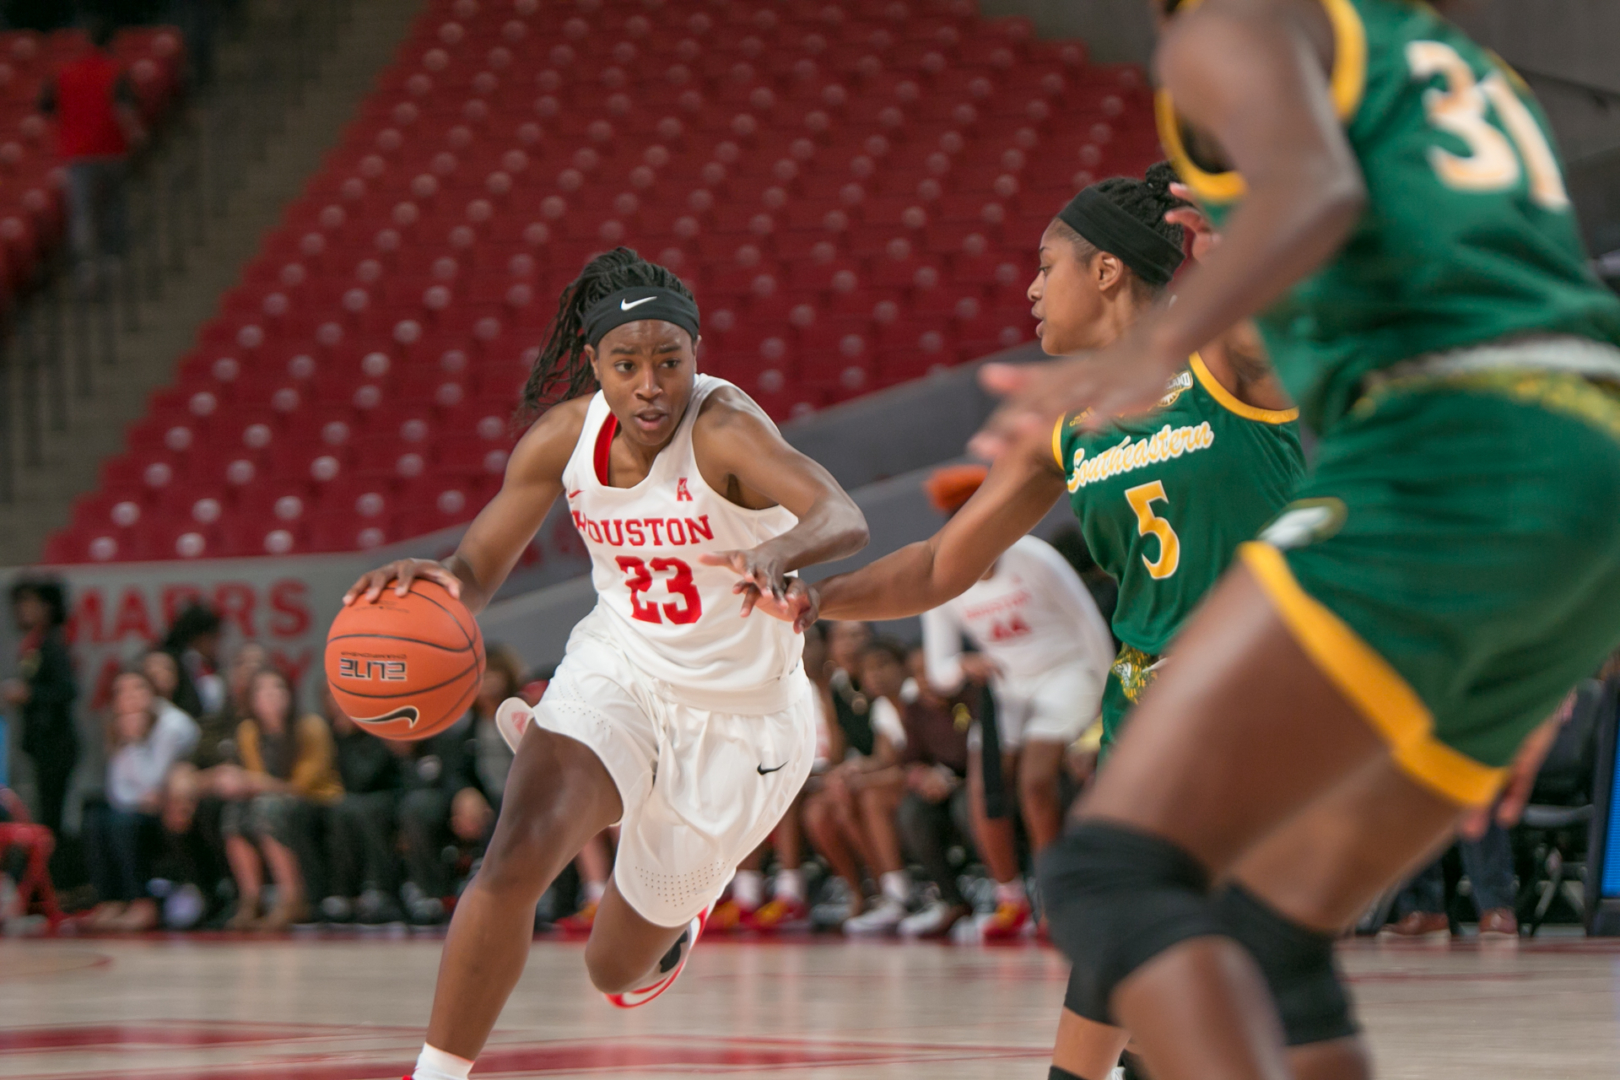 Julia Blackshell-Fair, who led all scorers with 19 points in Sunday's conference win against the Tigers, driving down the lane. | File Photo